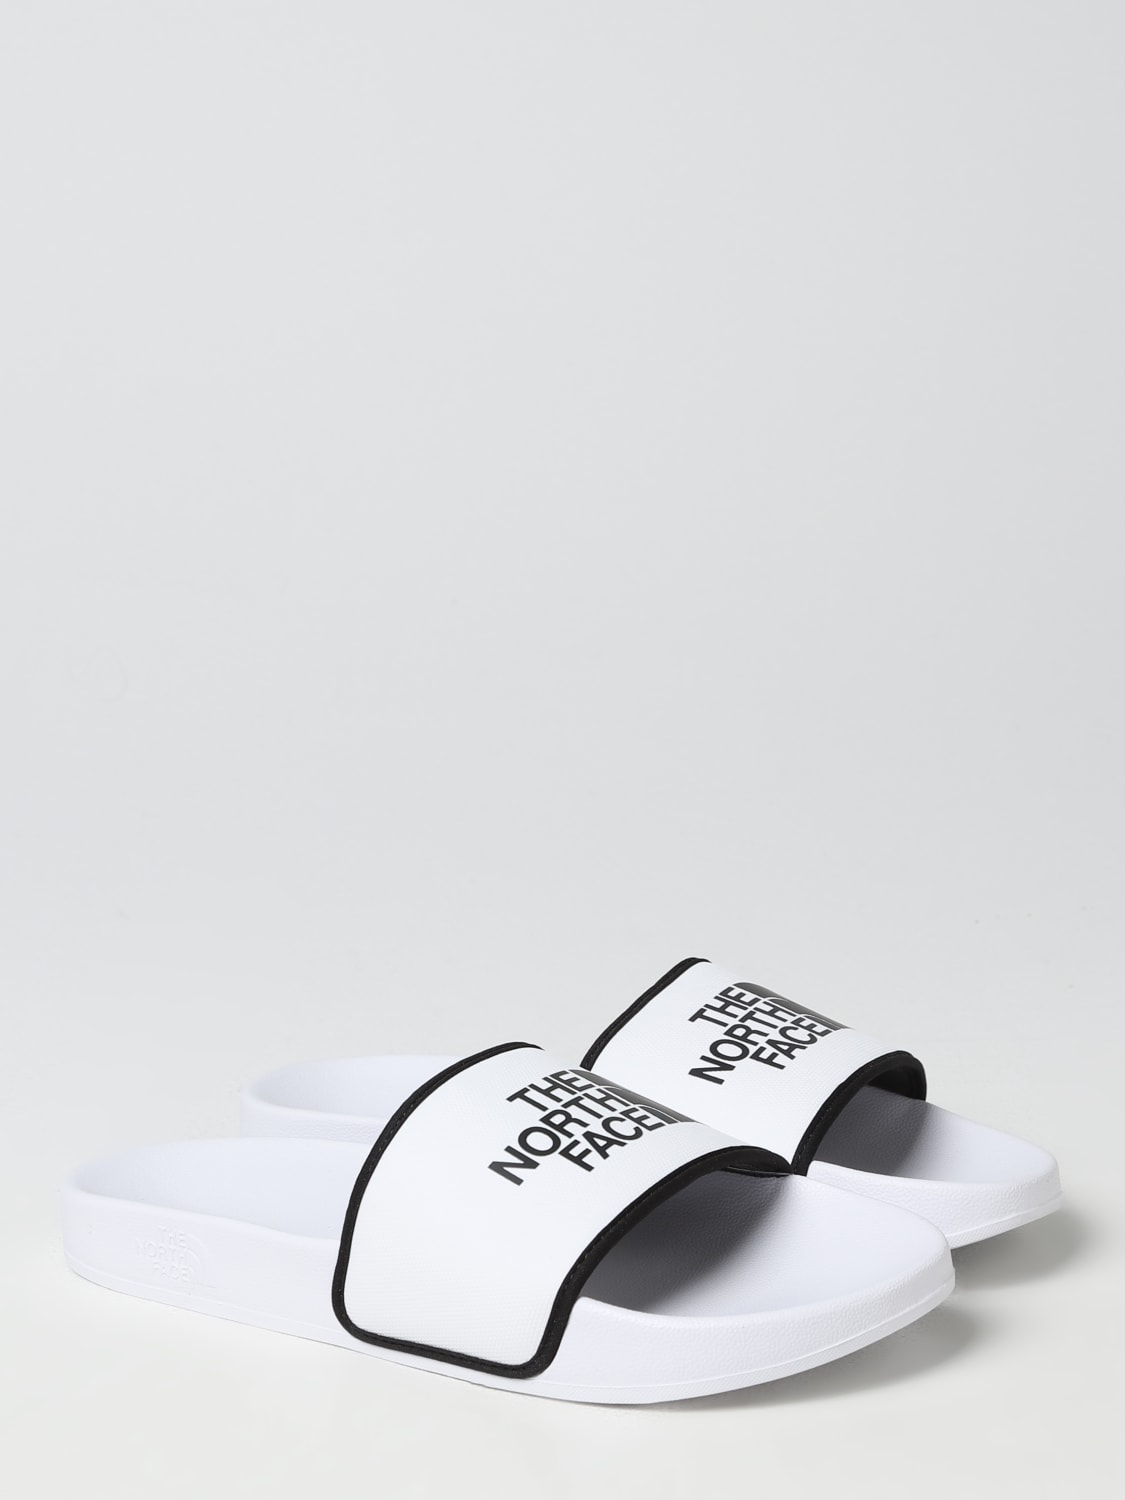 THE NORTH sandals man - White | North sandals NF0A4T2R online at GIGLIO.COM